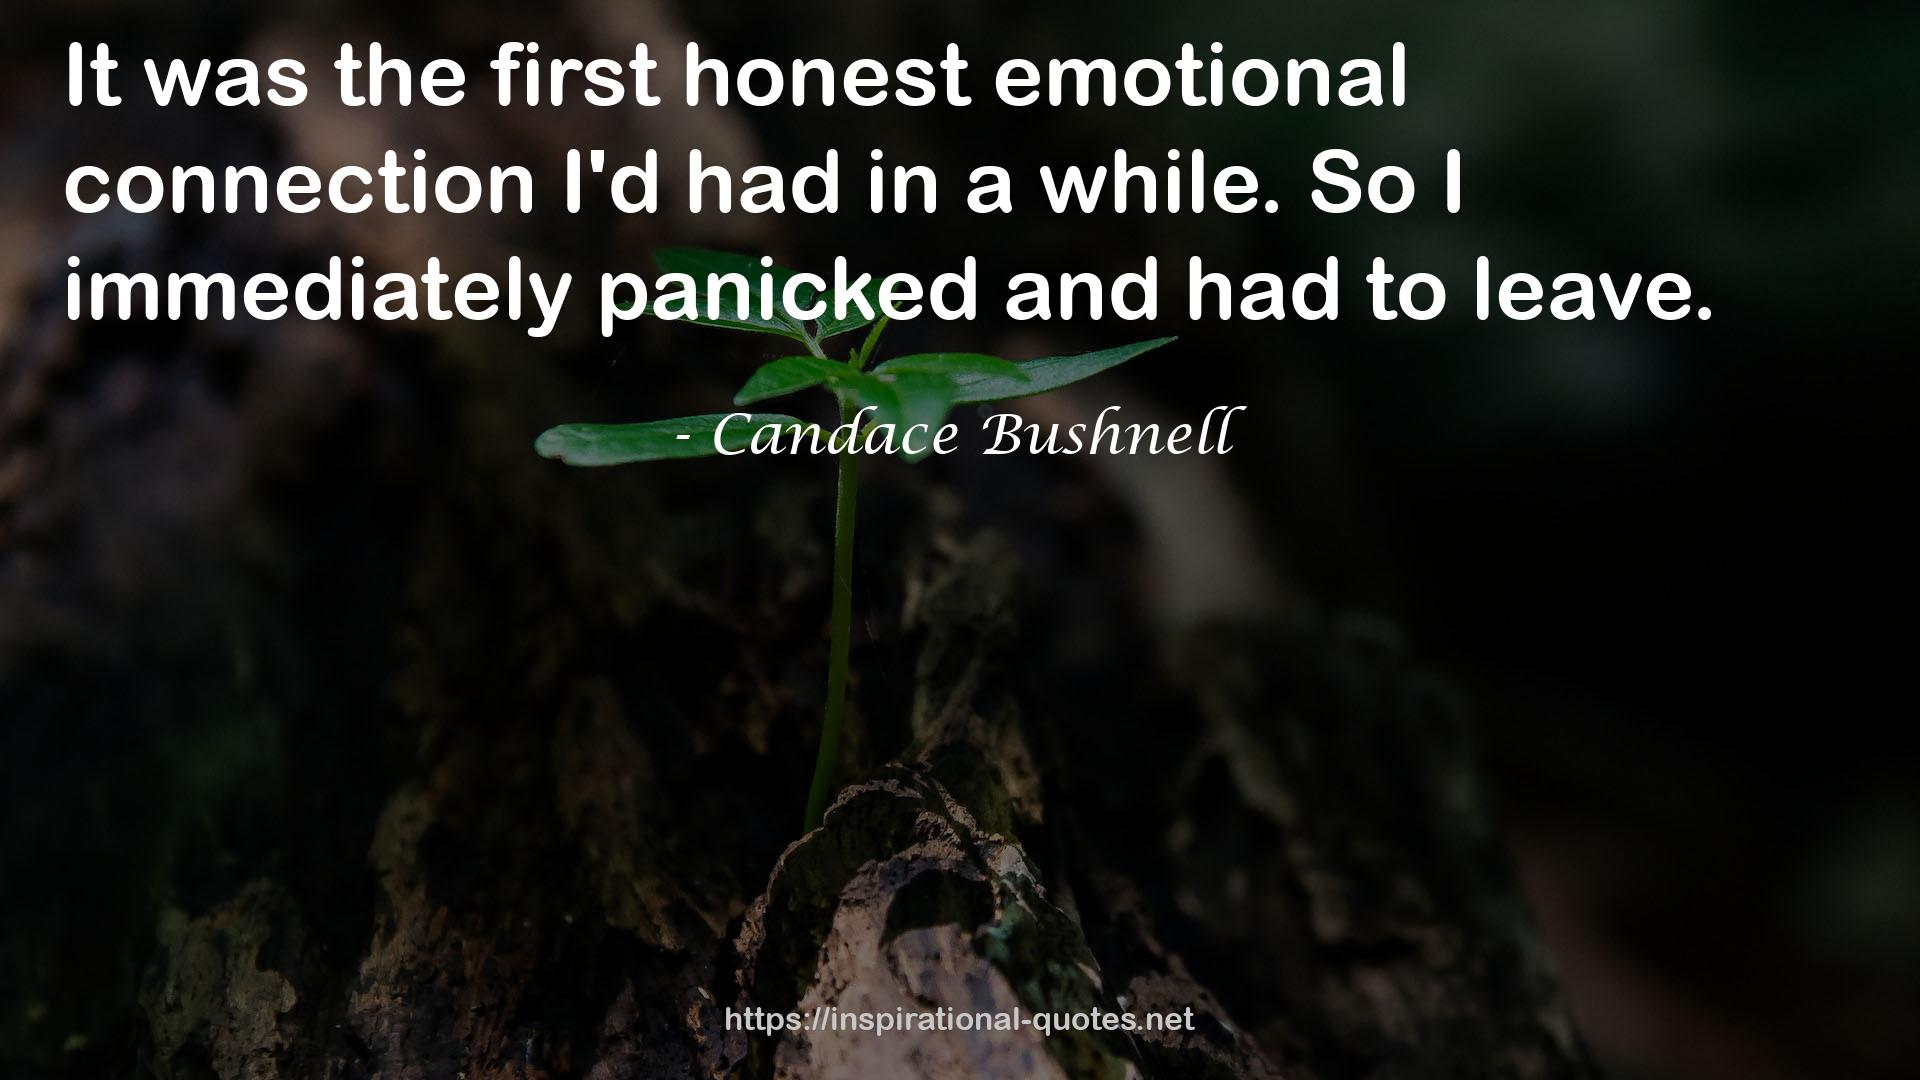 the first honest emotional connection  QUOTES